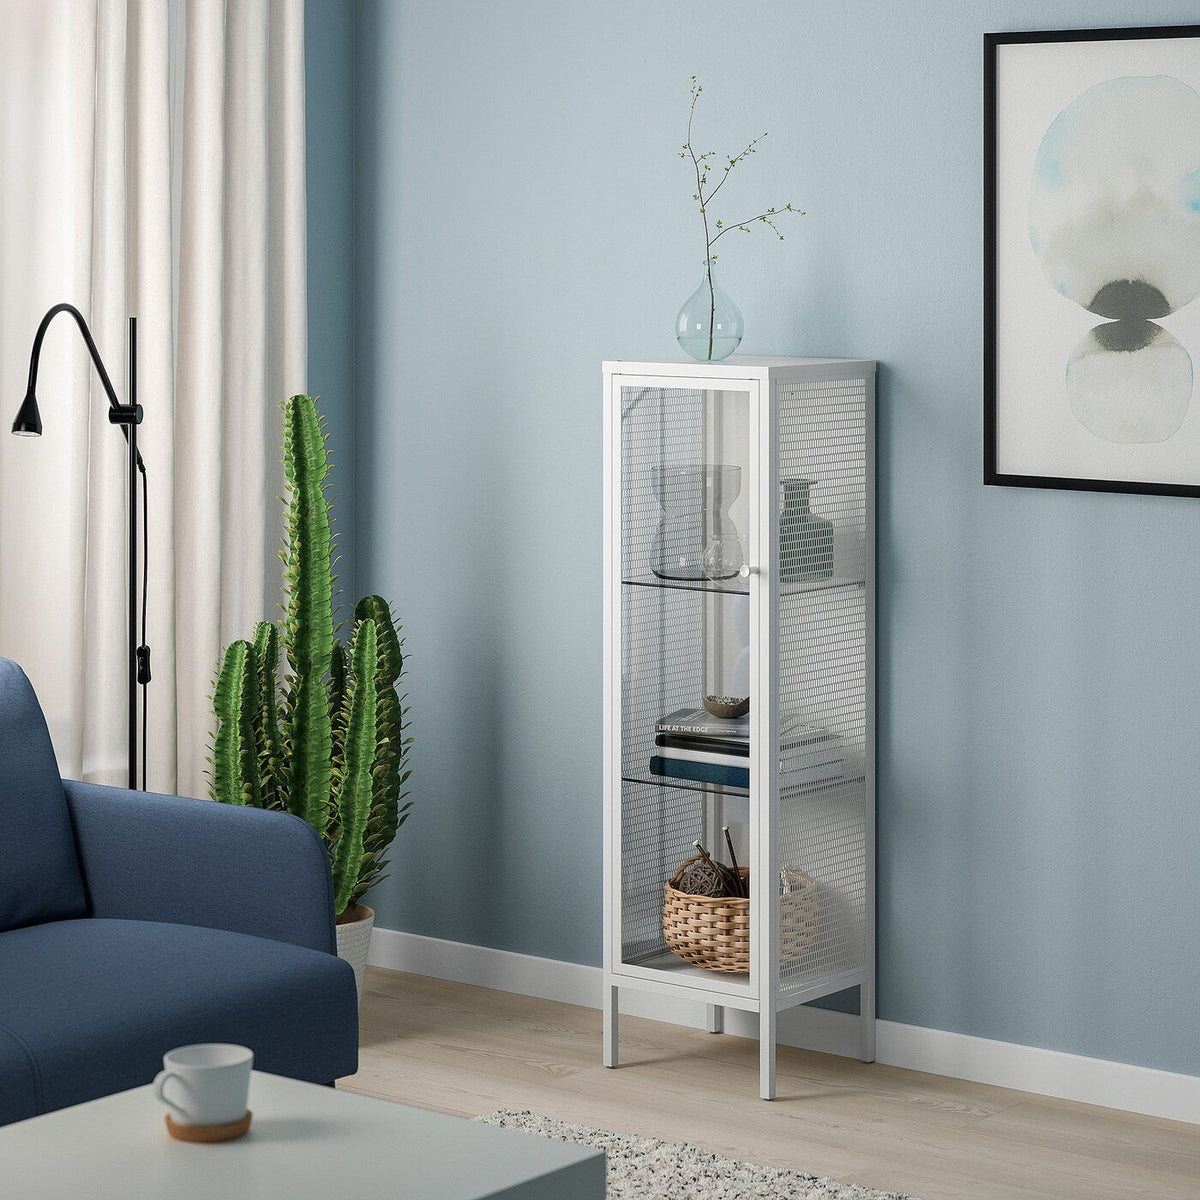 IKEA BAGGEBO cabinet with glass doors, 34x30x116 cm